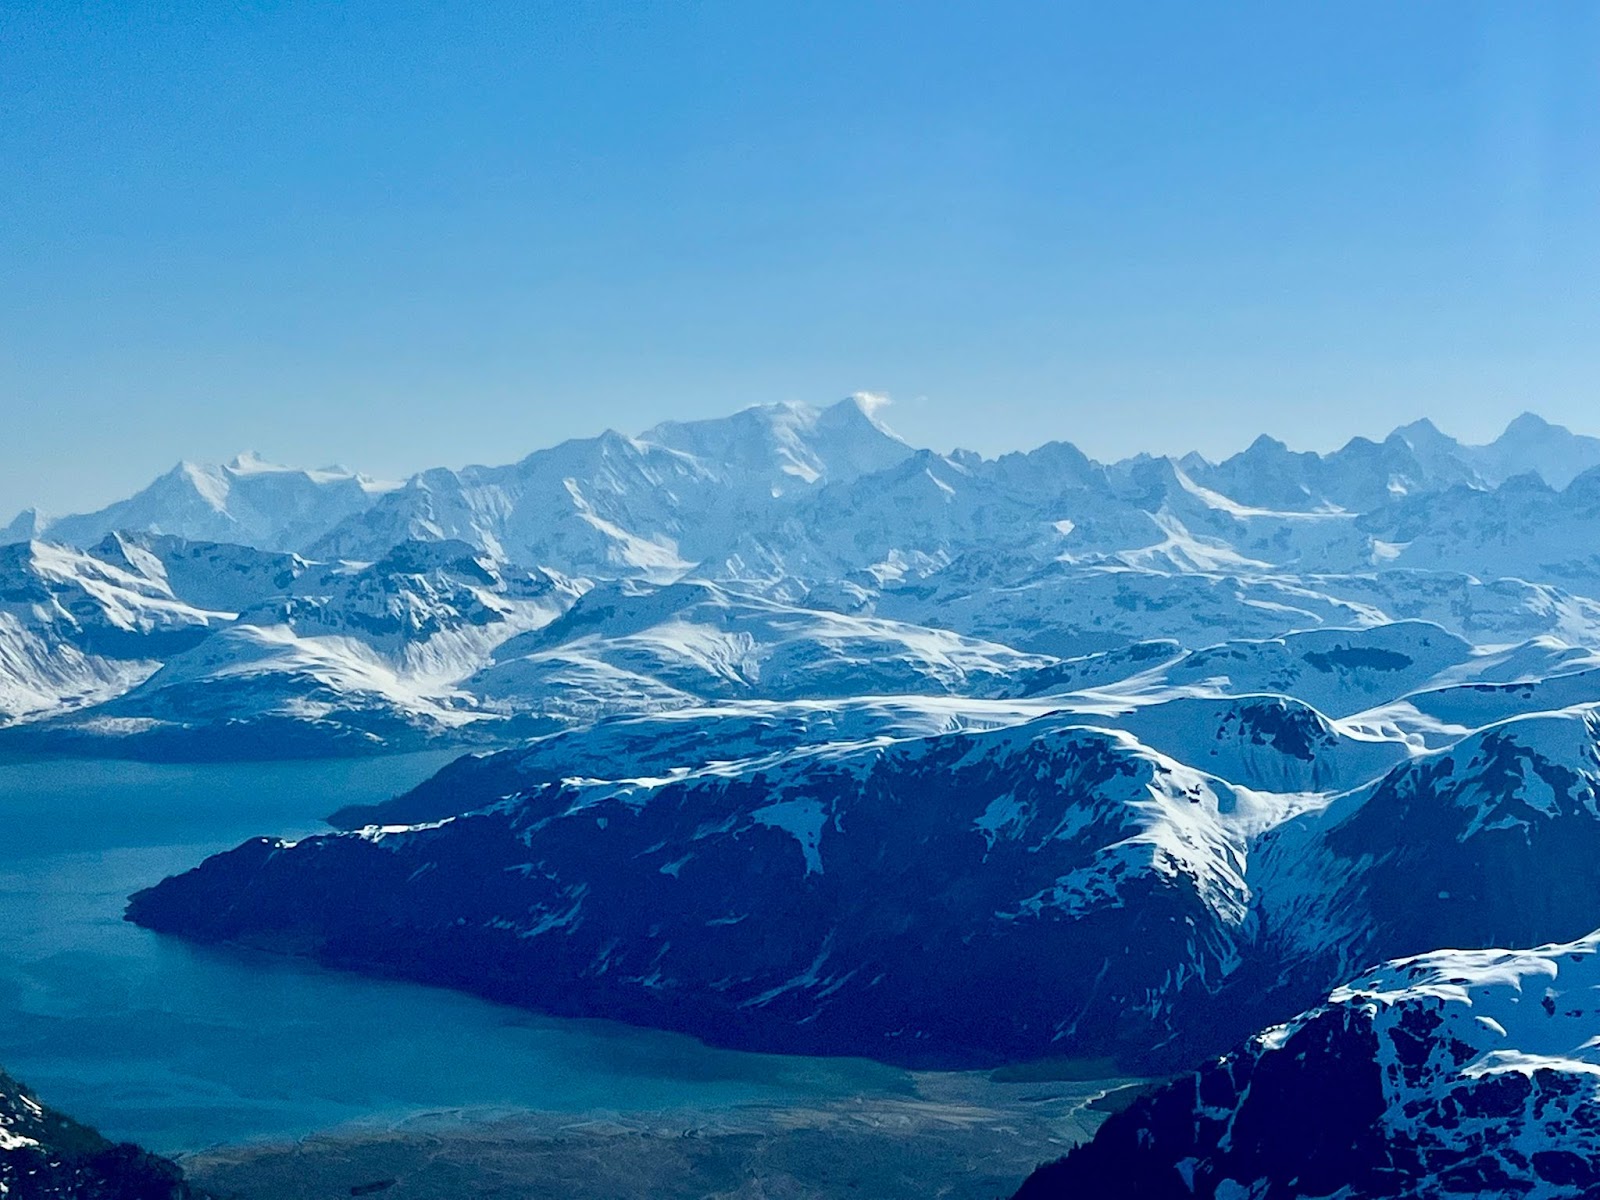 An aerial view of a blue-water bay surrounded by snow-capped mountains.